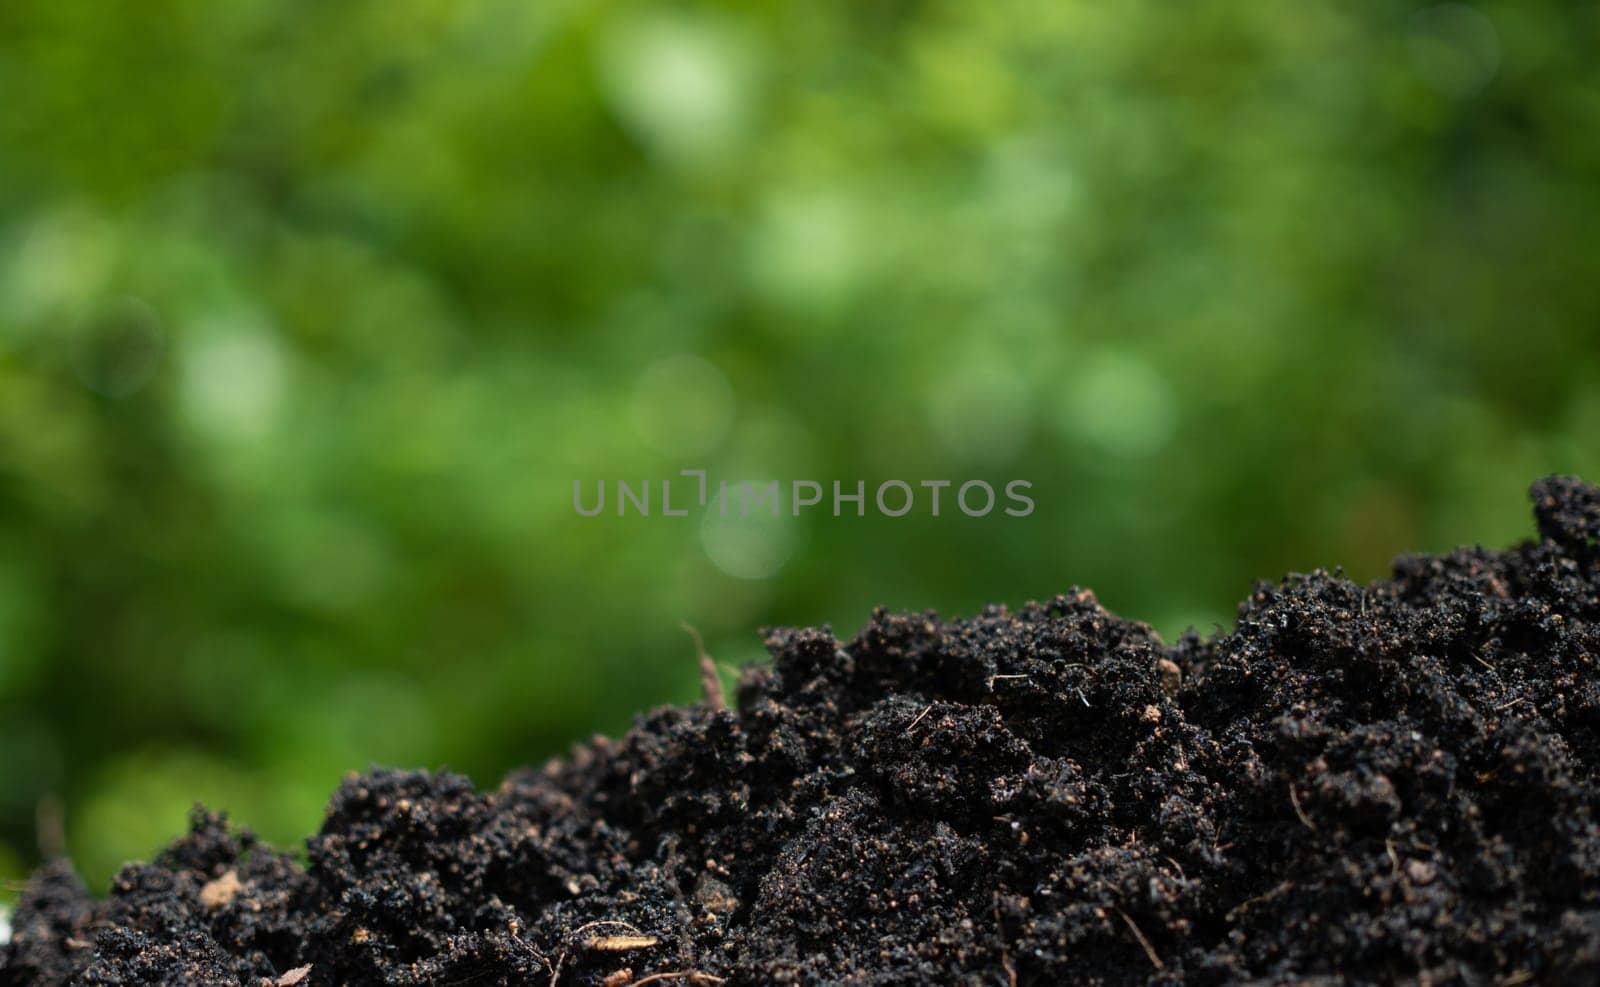 Background with soil and green from nature. Environmental protection concept, reforestation, CO2 reduction, recycle.